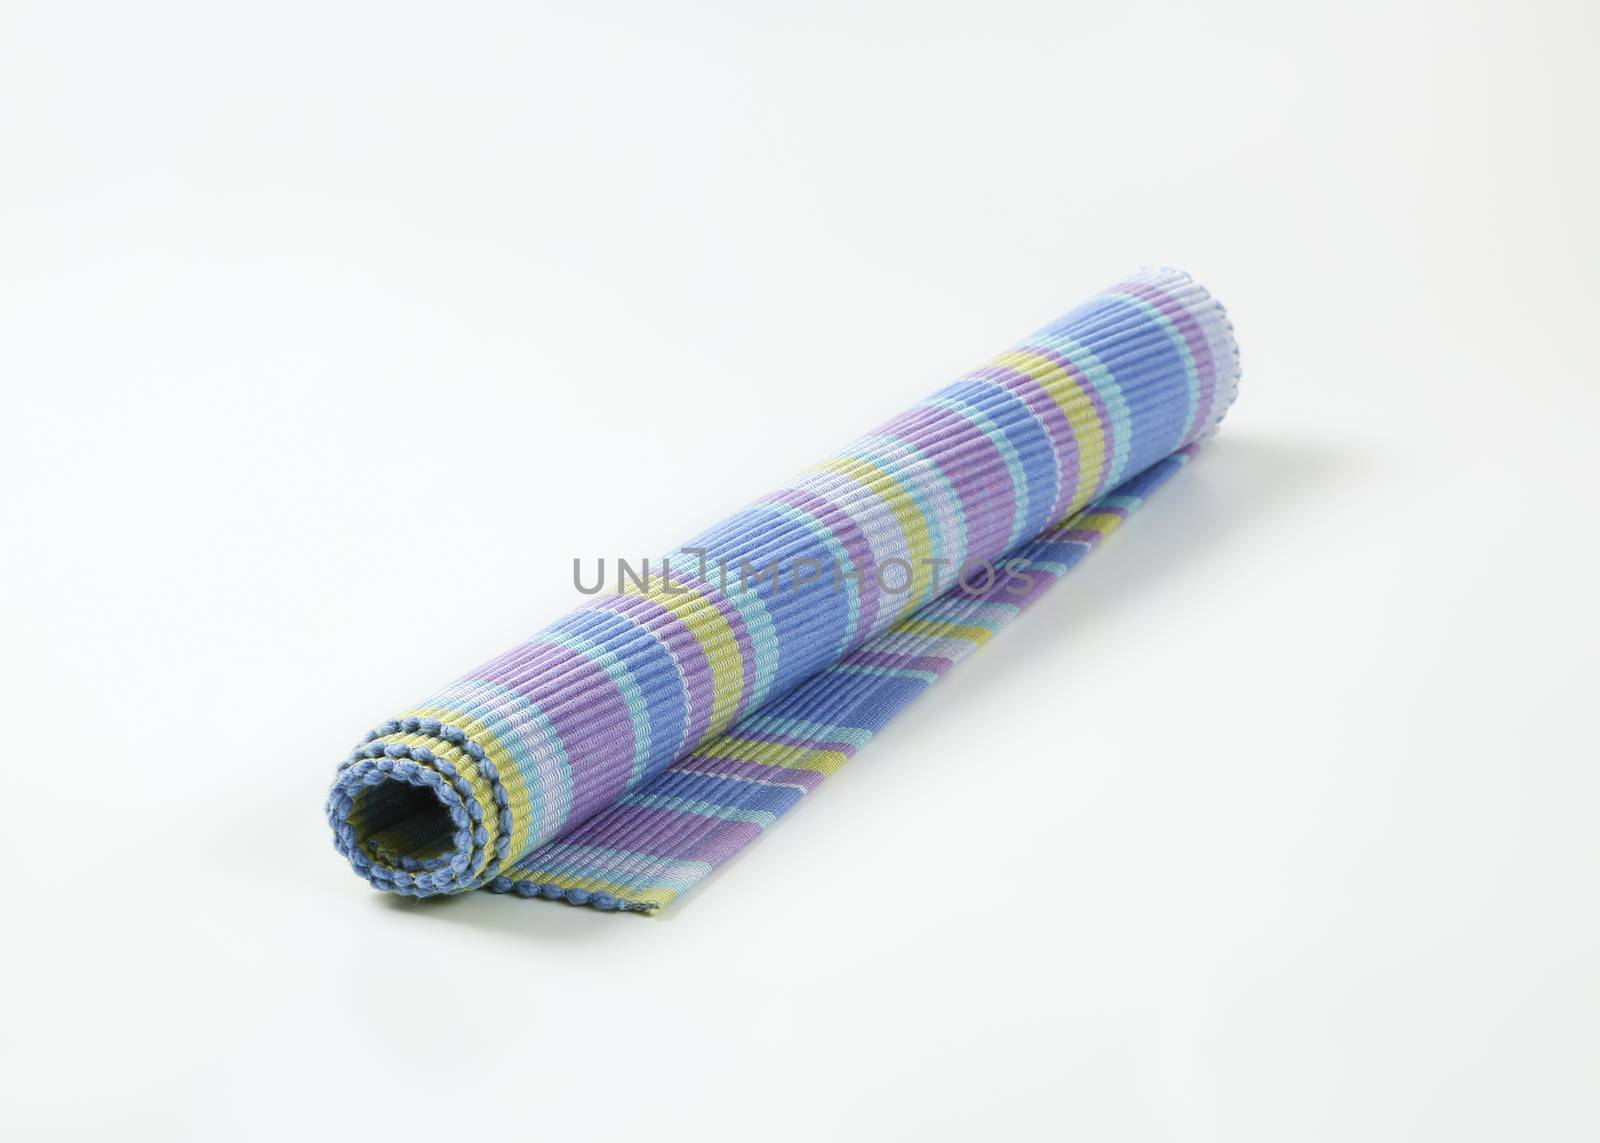 Colorful striped ribbed woven cotton place mat - rolled up